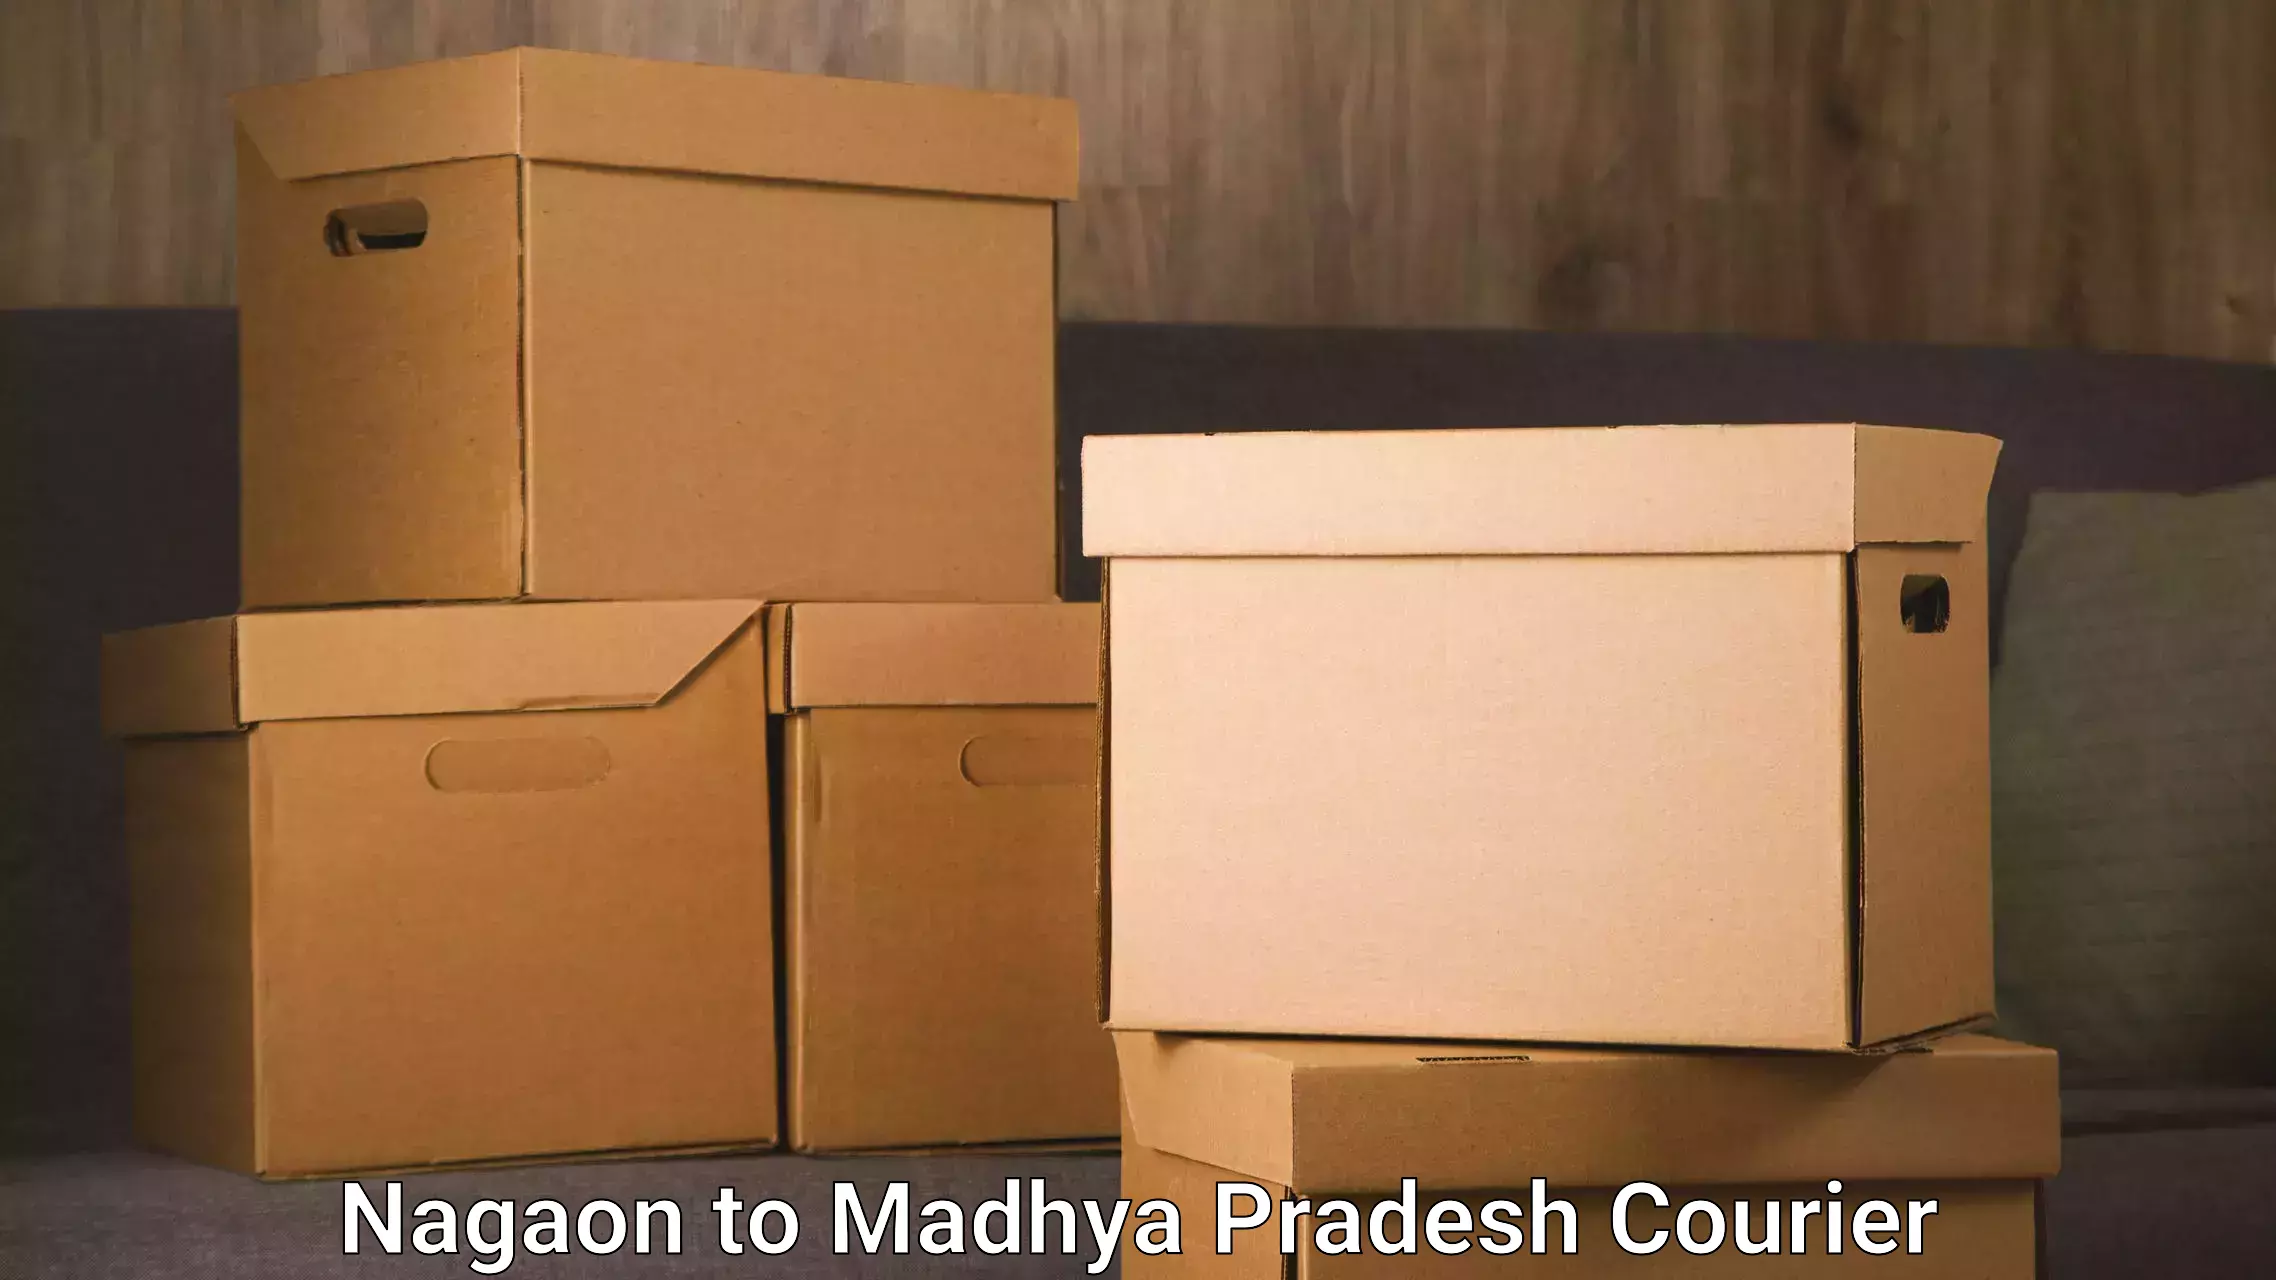 Courier service innovation in Nagaon to Hatta